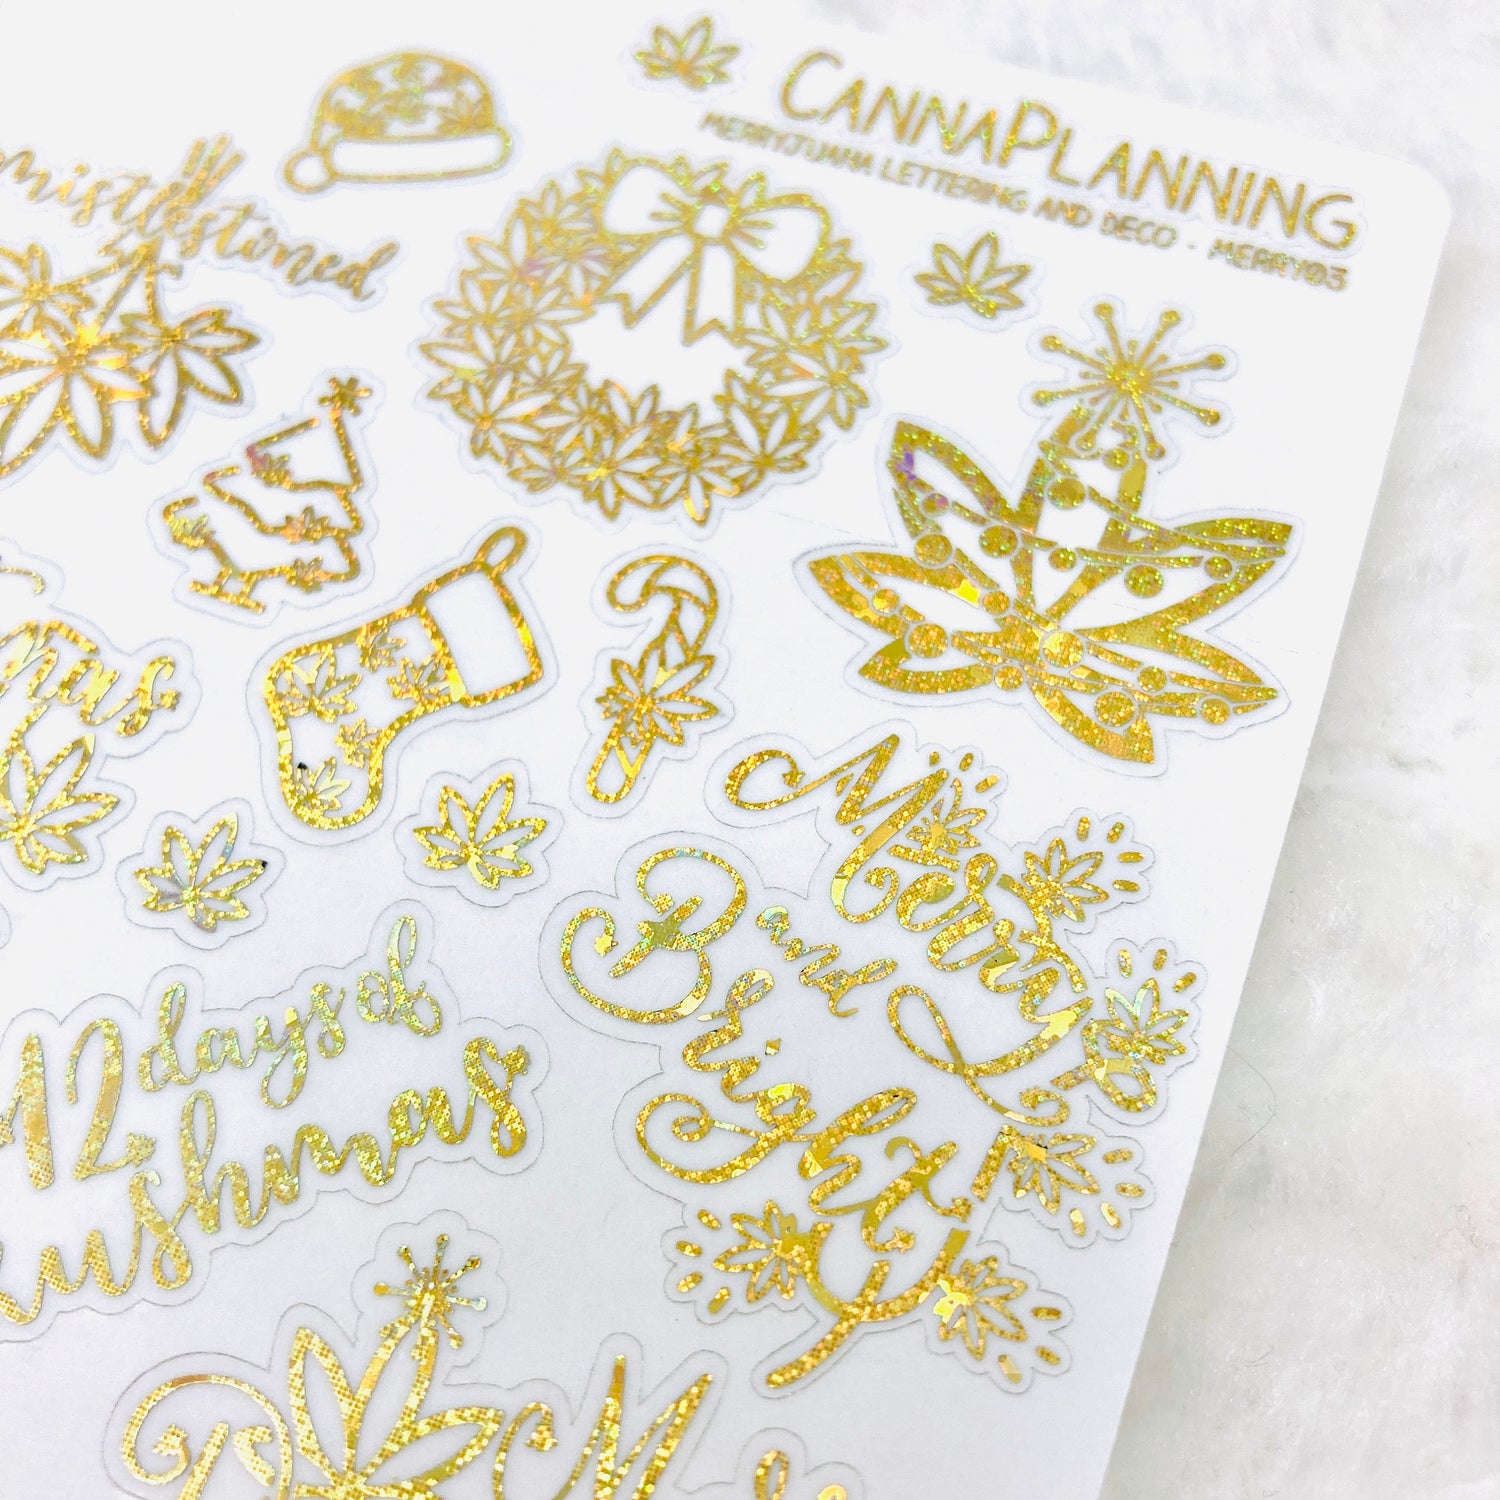 CLEAR FOILED Merryjuana Christmas Deco and Hand-lettered stickers | kushmas winter stickers holiday winter christmas Dankmas stickers (6012255174833)